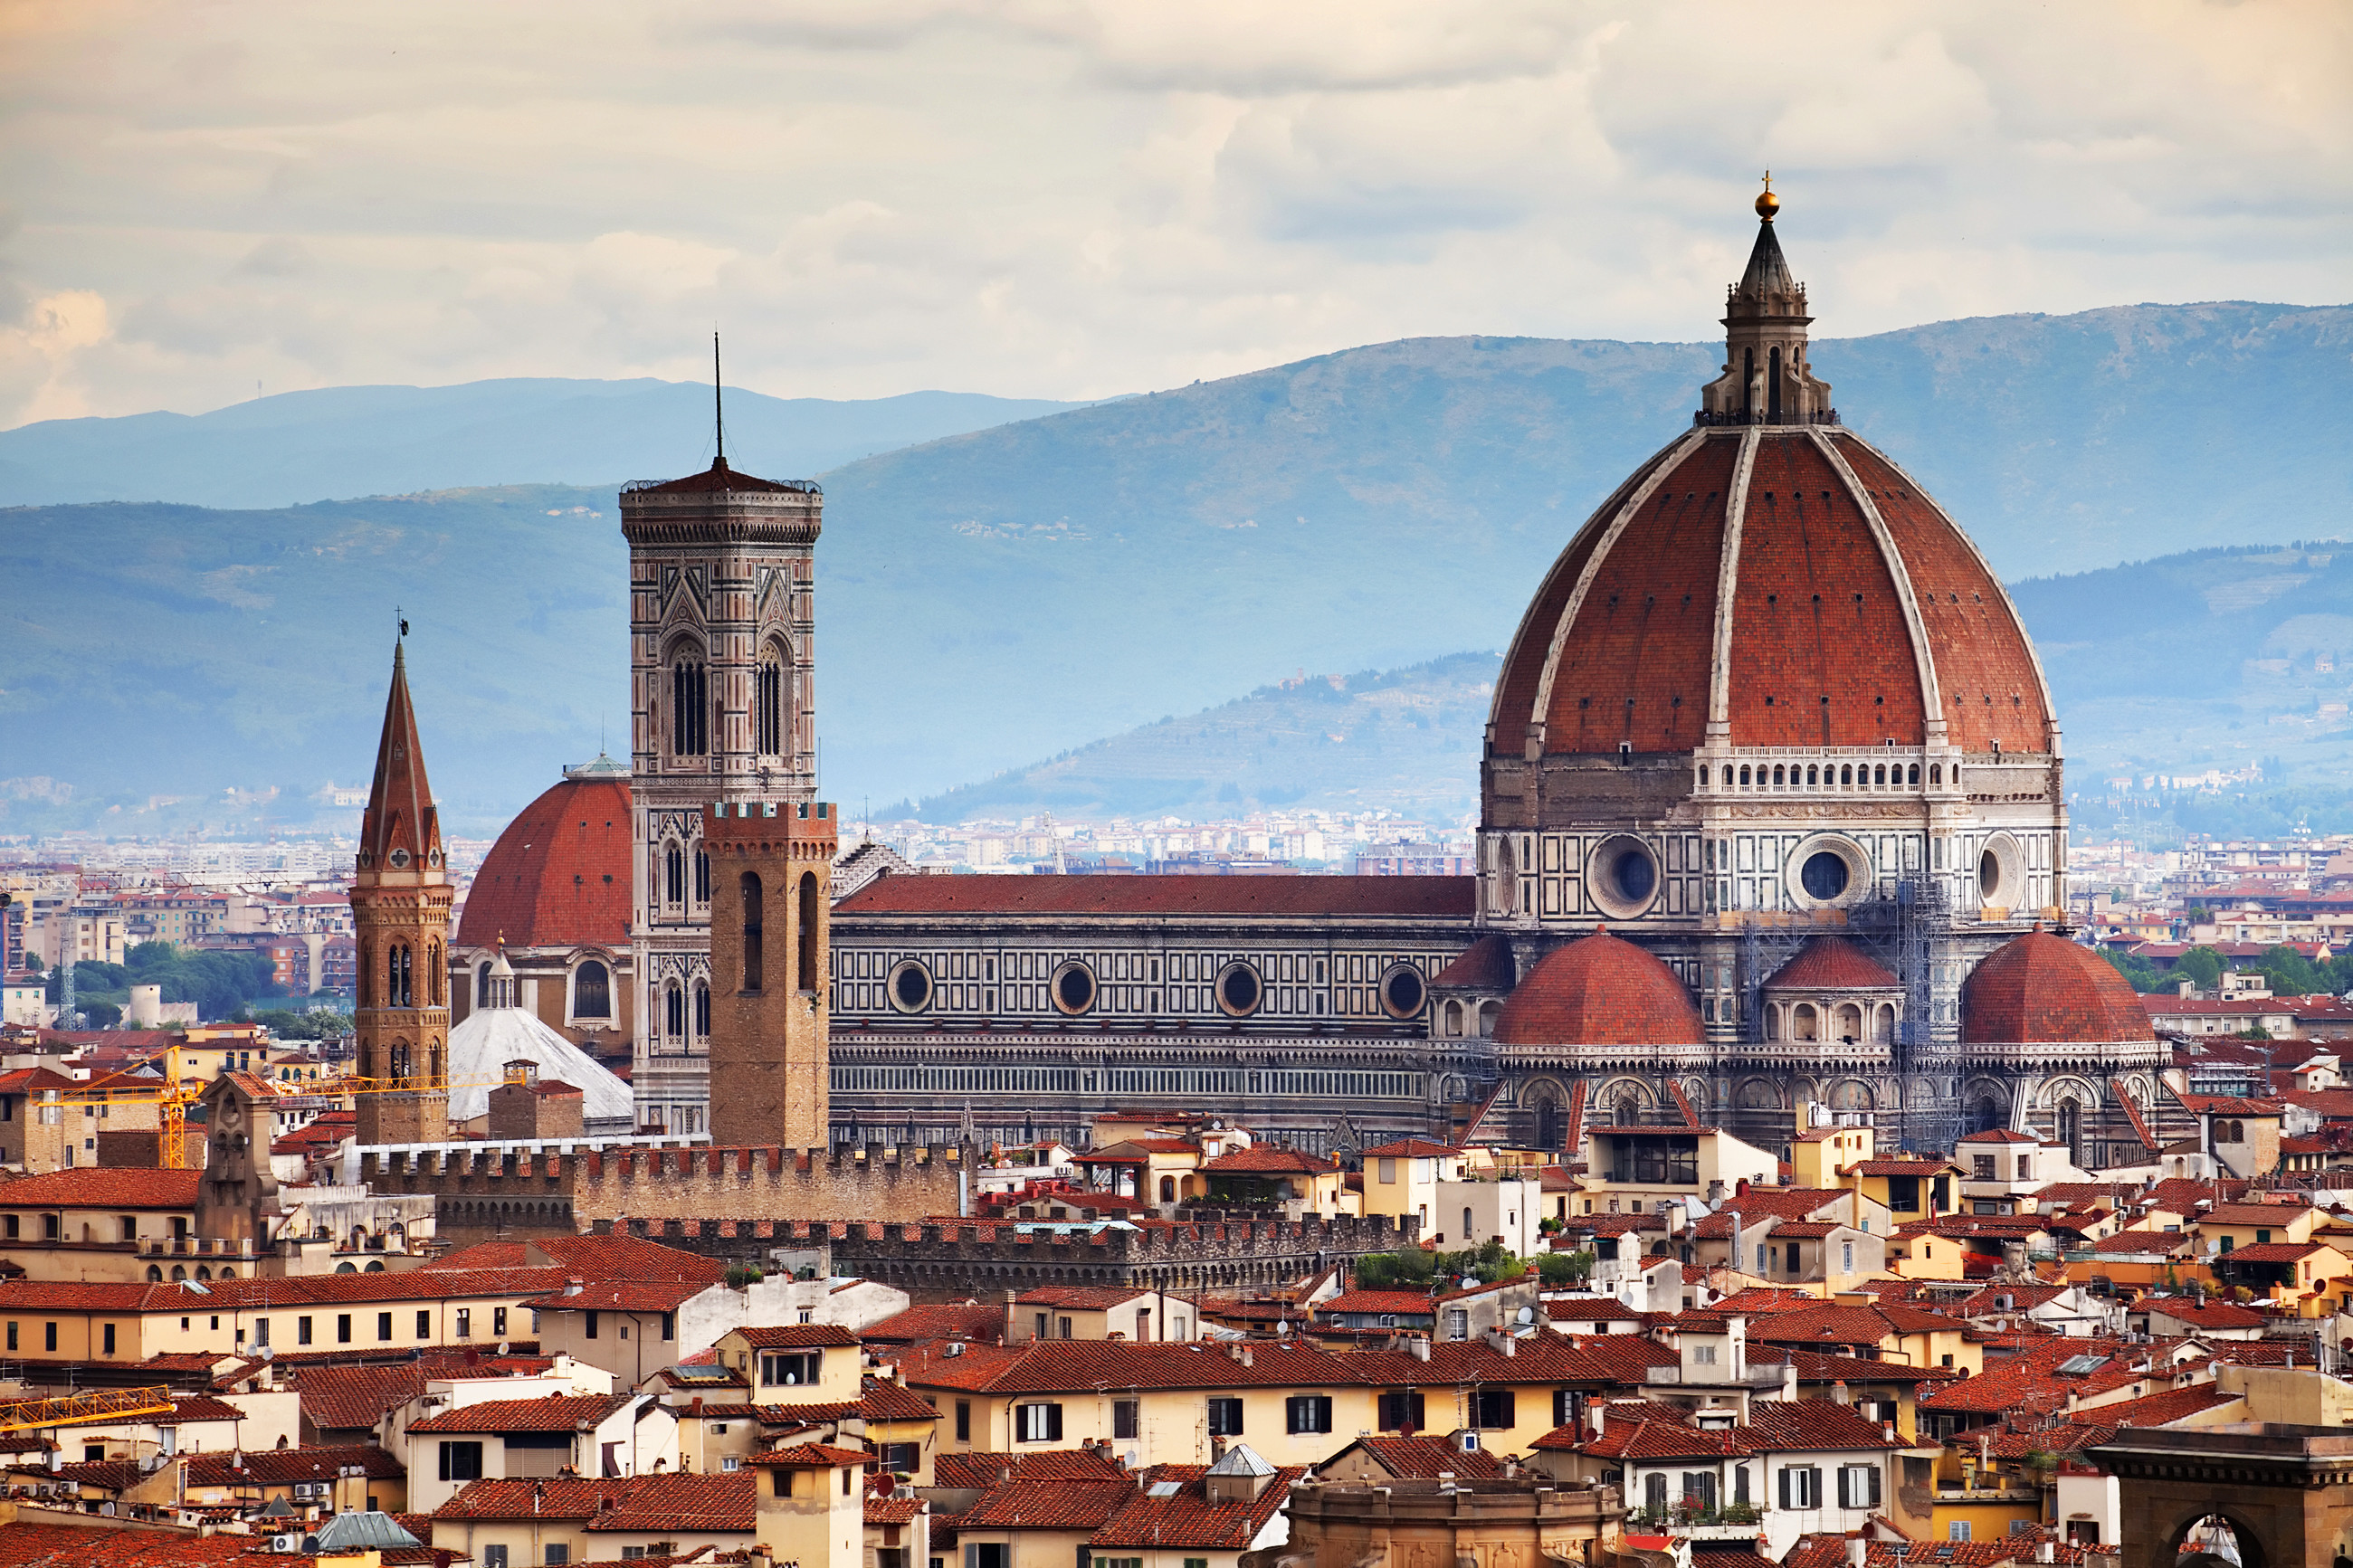 places to do homework in florence